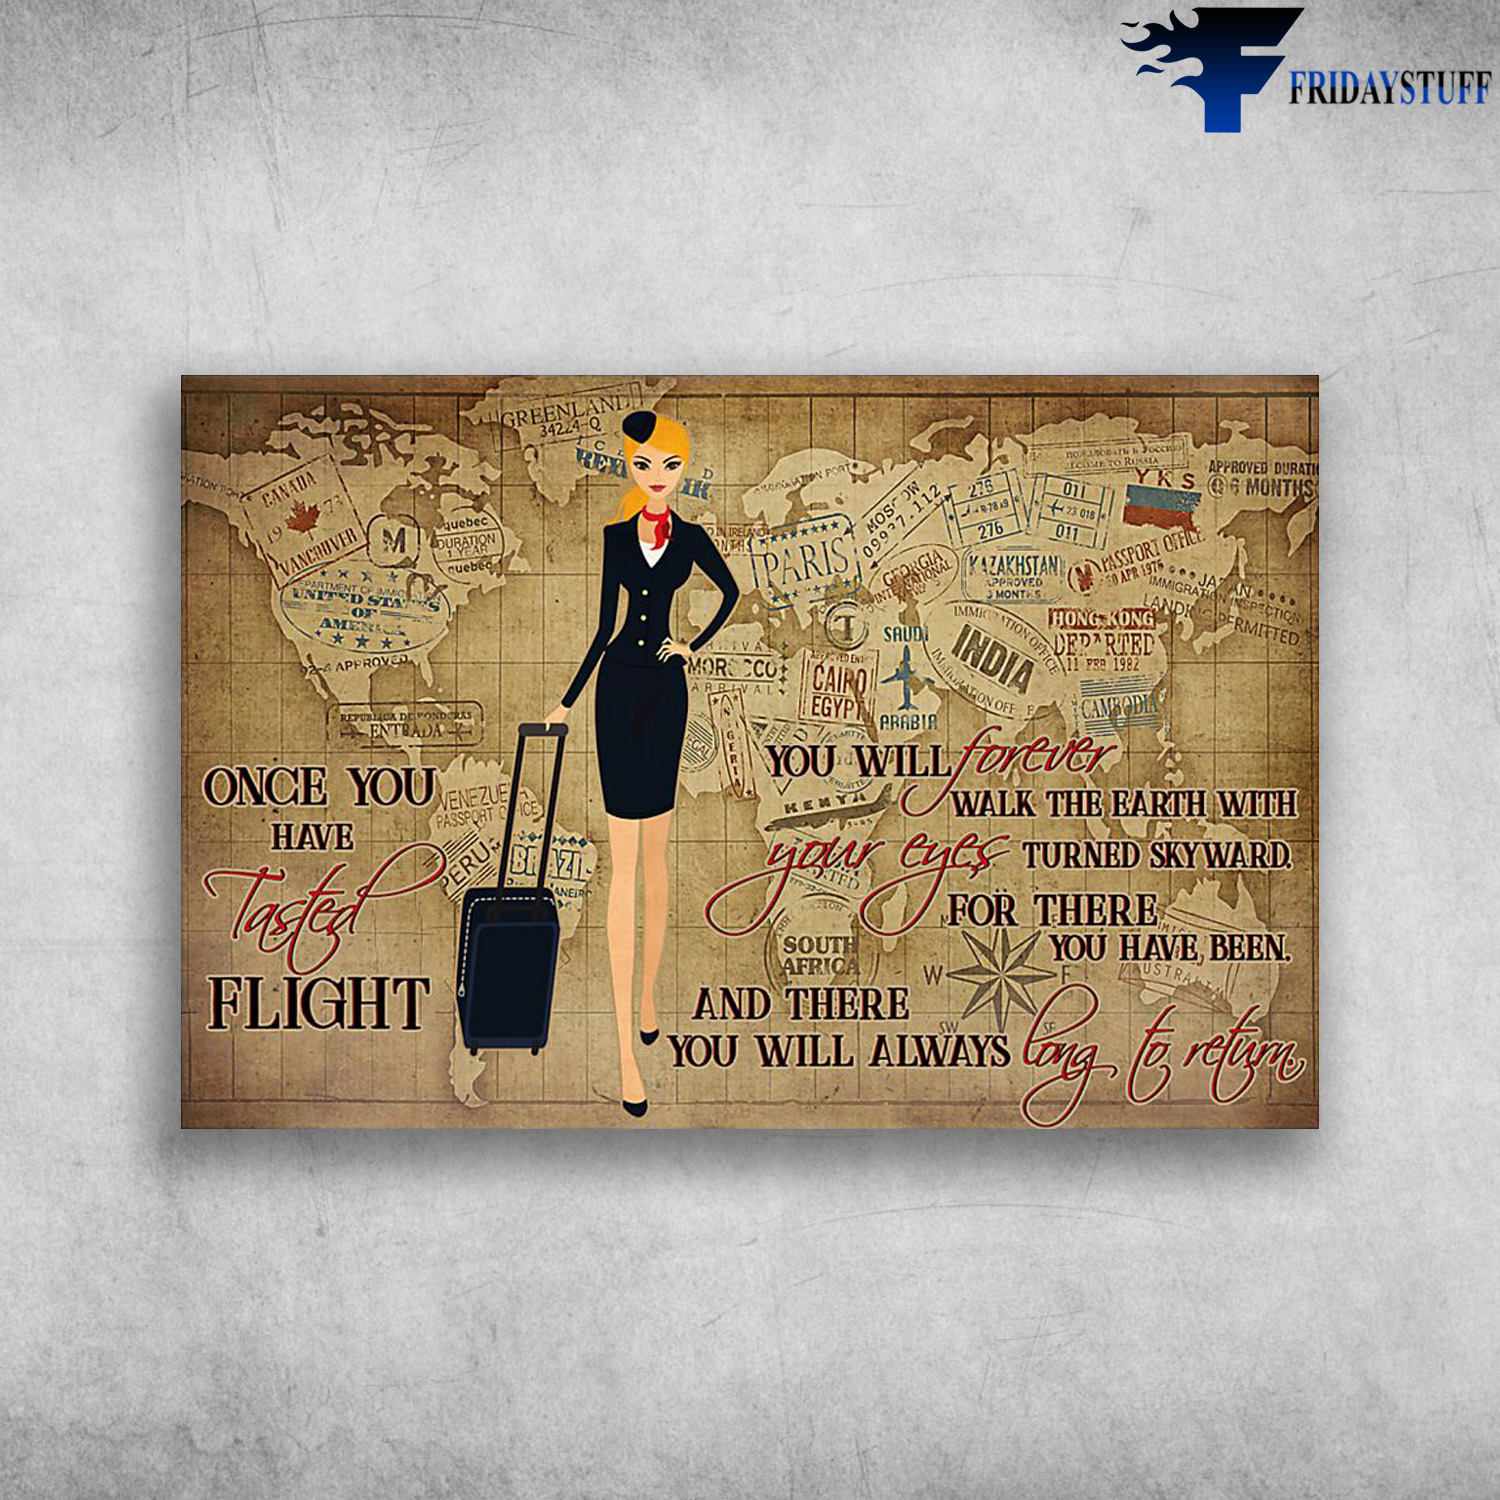 Flight Attendant - Once You Have Tasted Flight, You Will Forever Walk The Earth